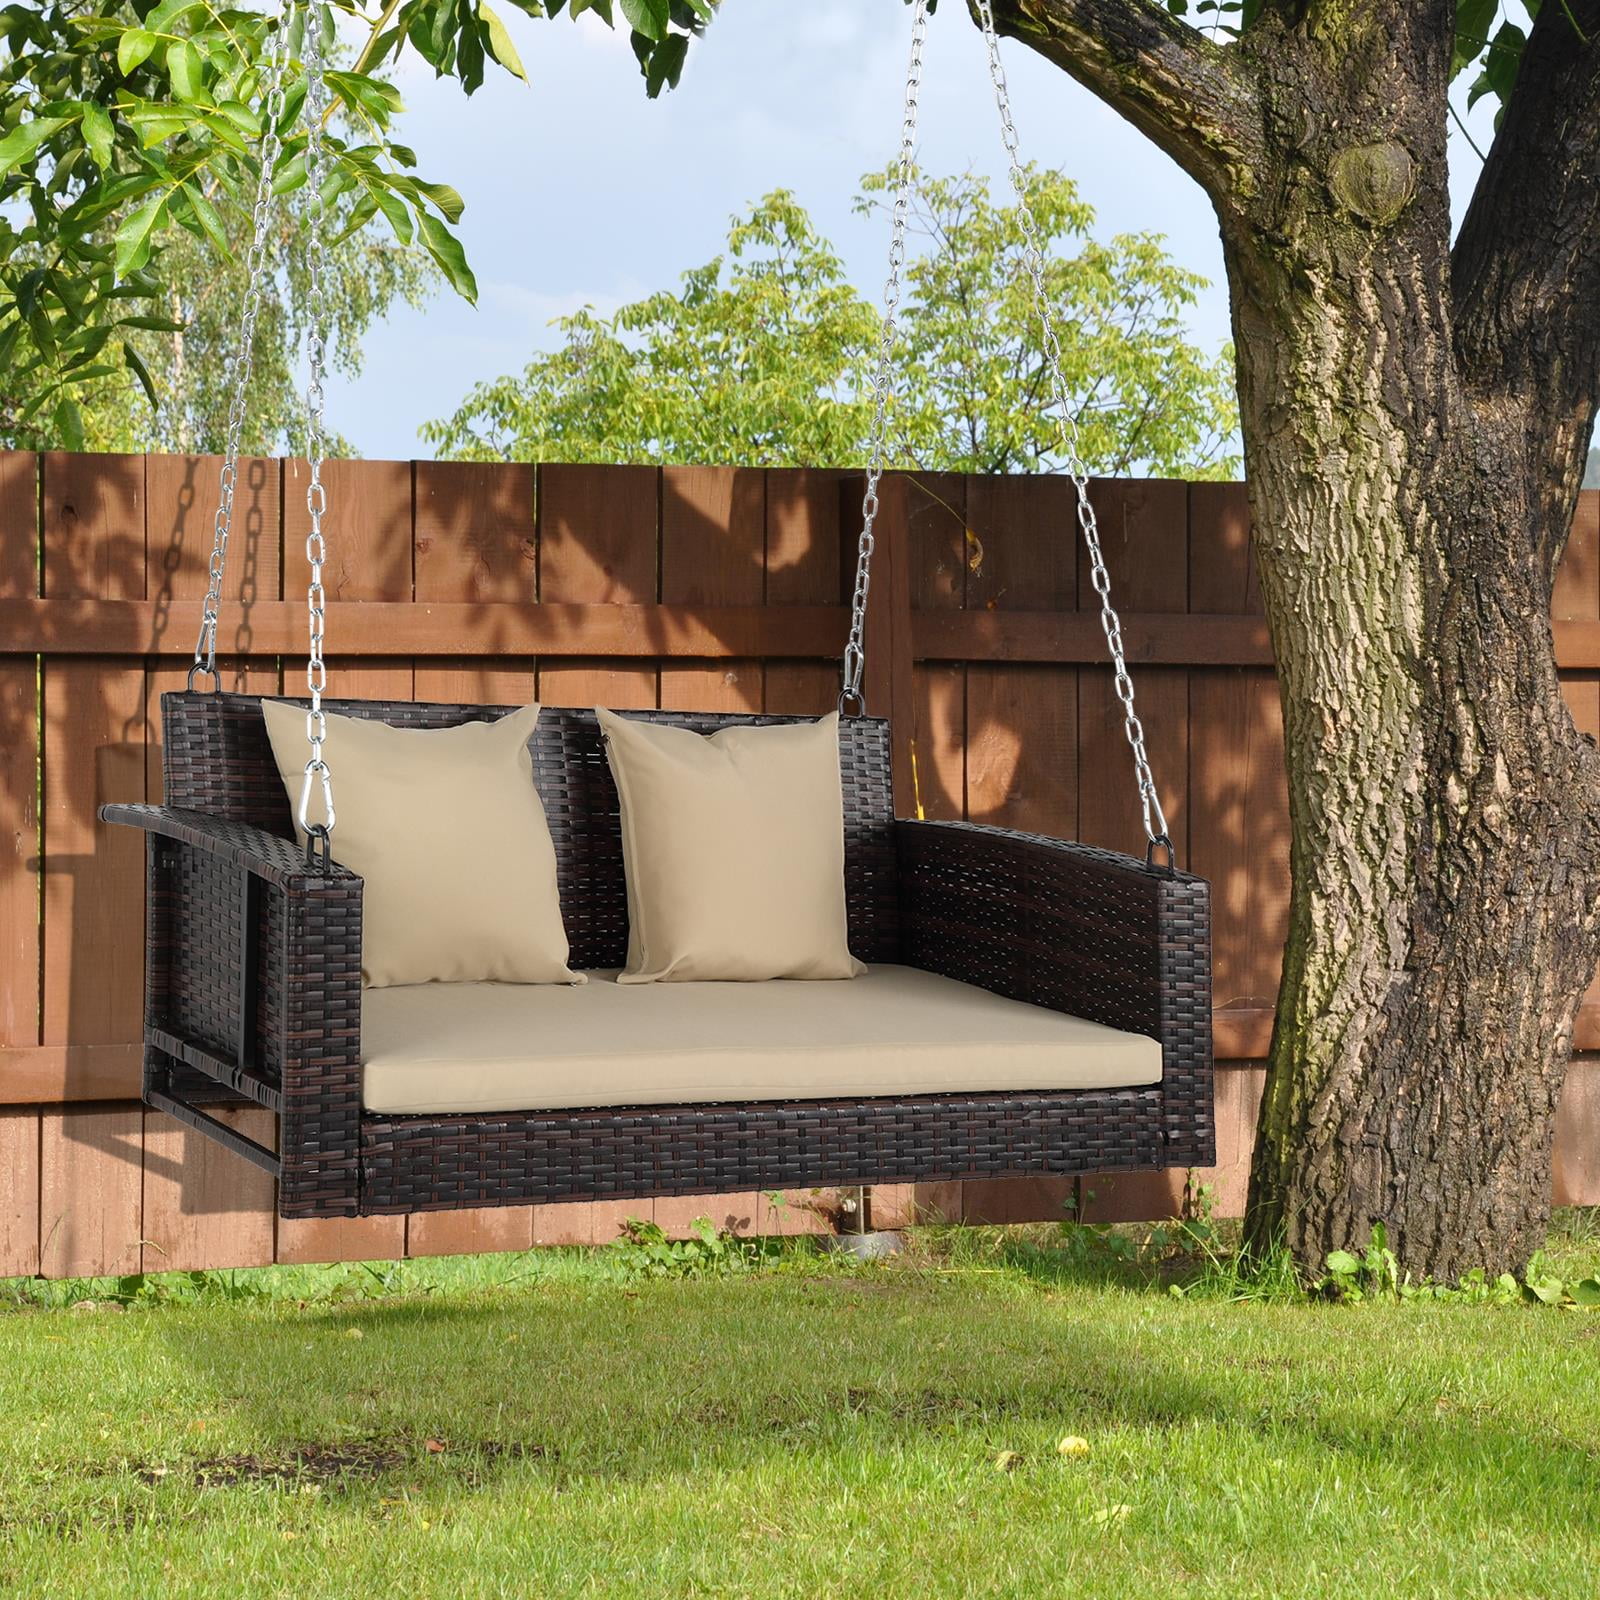 Jeco Resin Wicker Hanging Porch Swing with Cushion in Black and Tan 